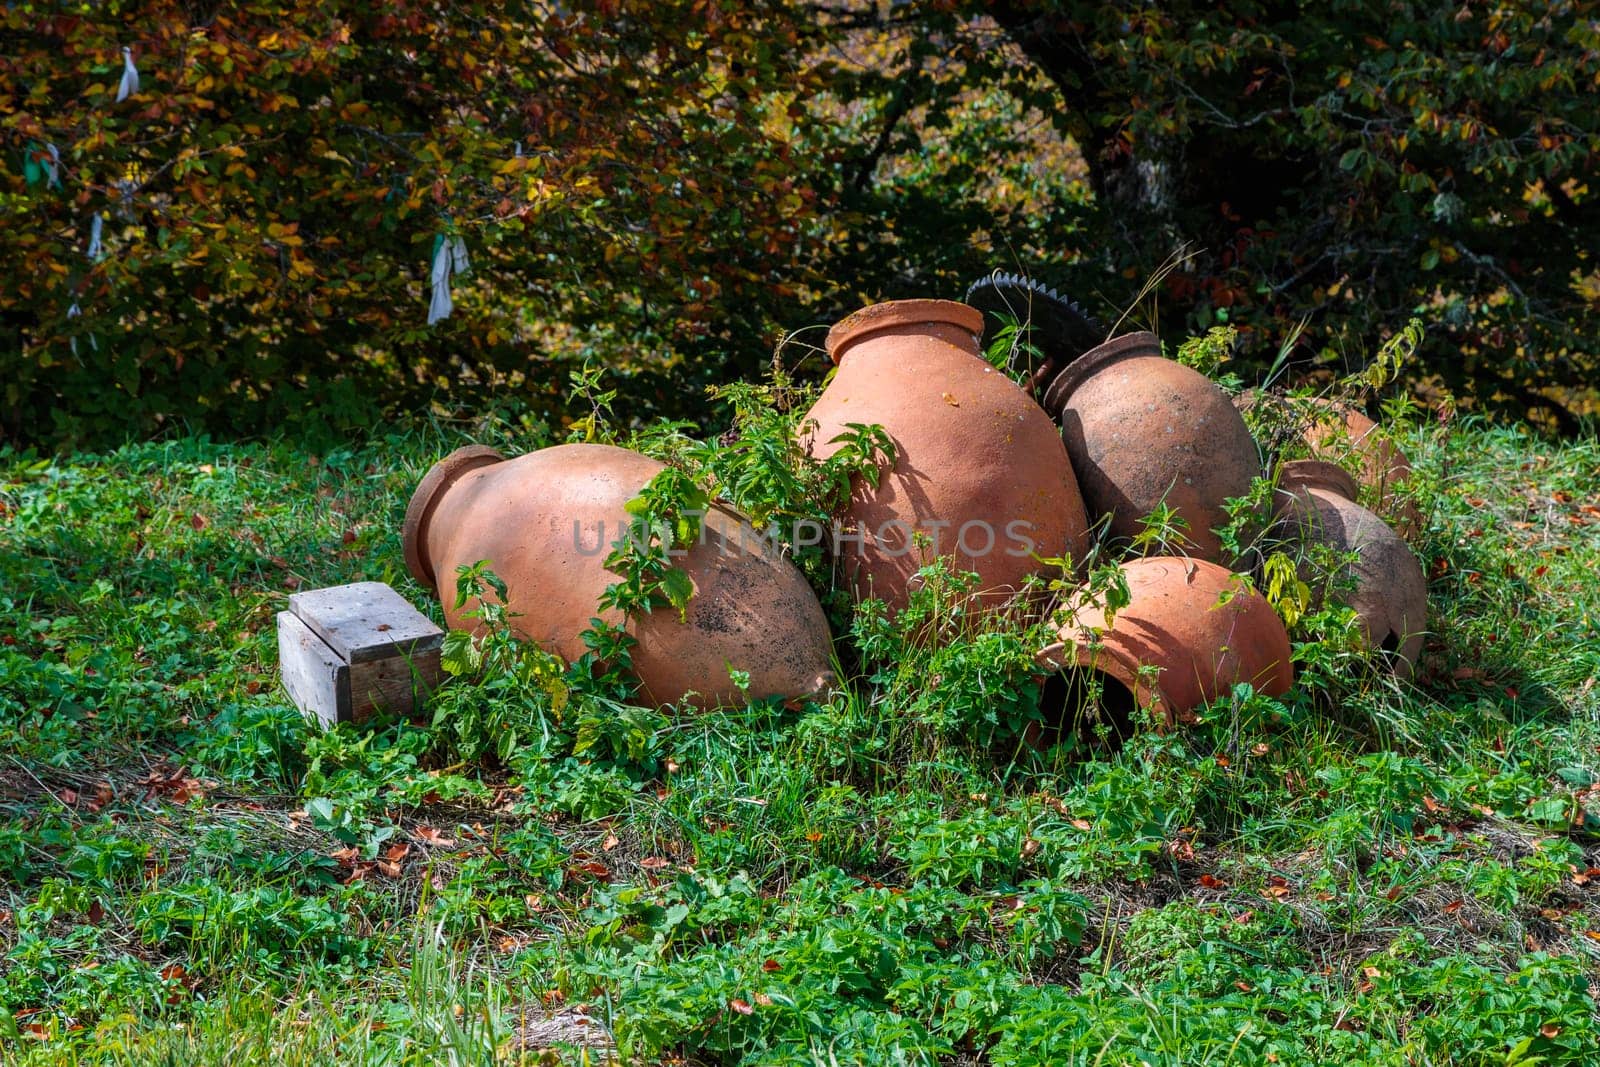 Georgian jugs, half-buried in the ground, display traditional pottery. This cultural image captures the essence of Georgian craftsmanship and heritage